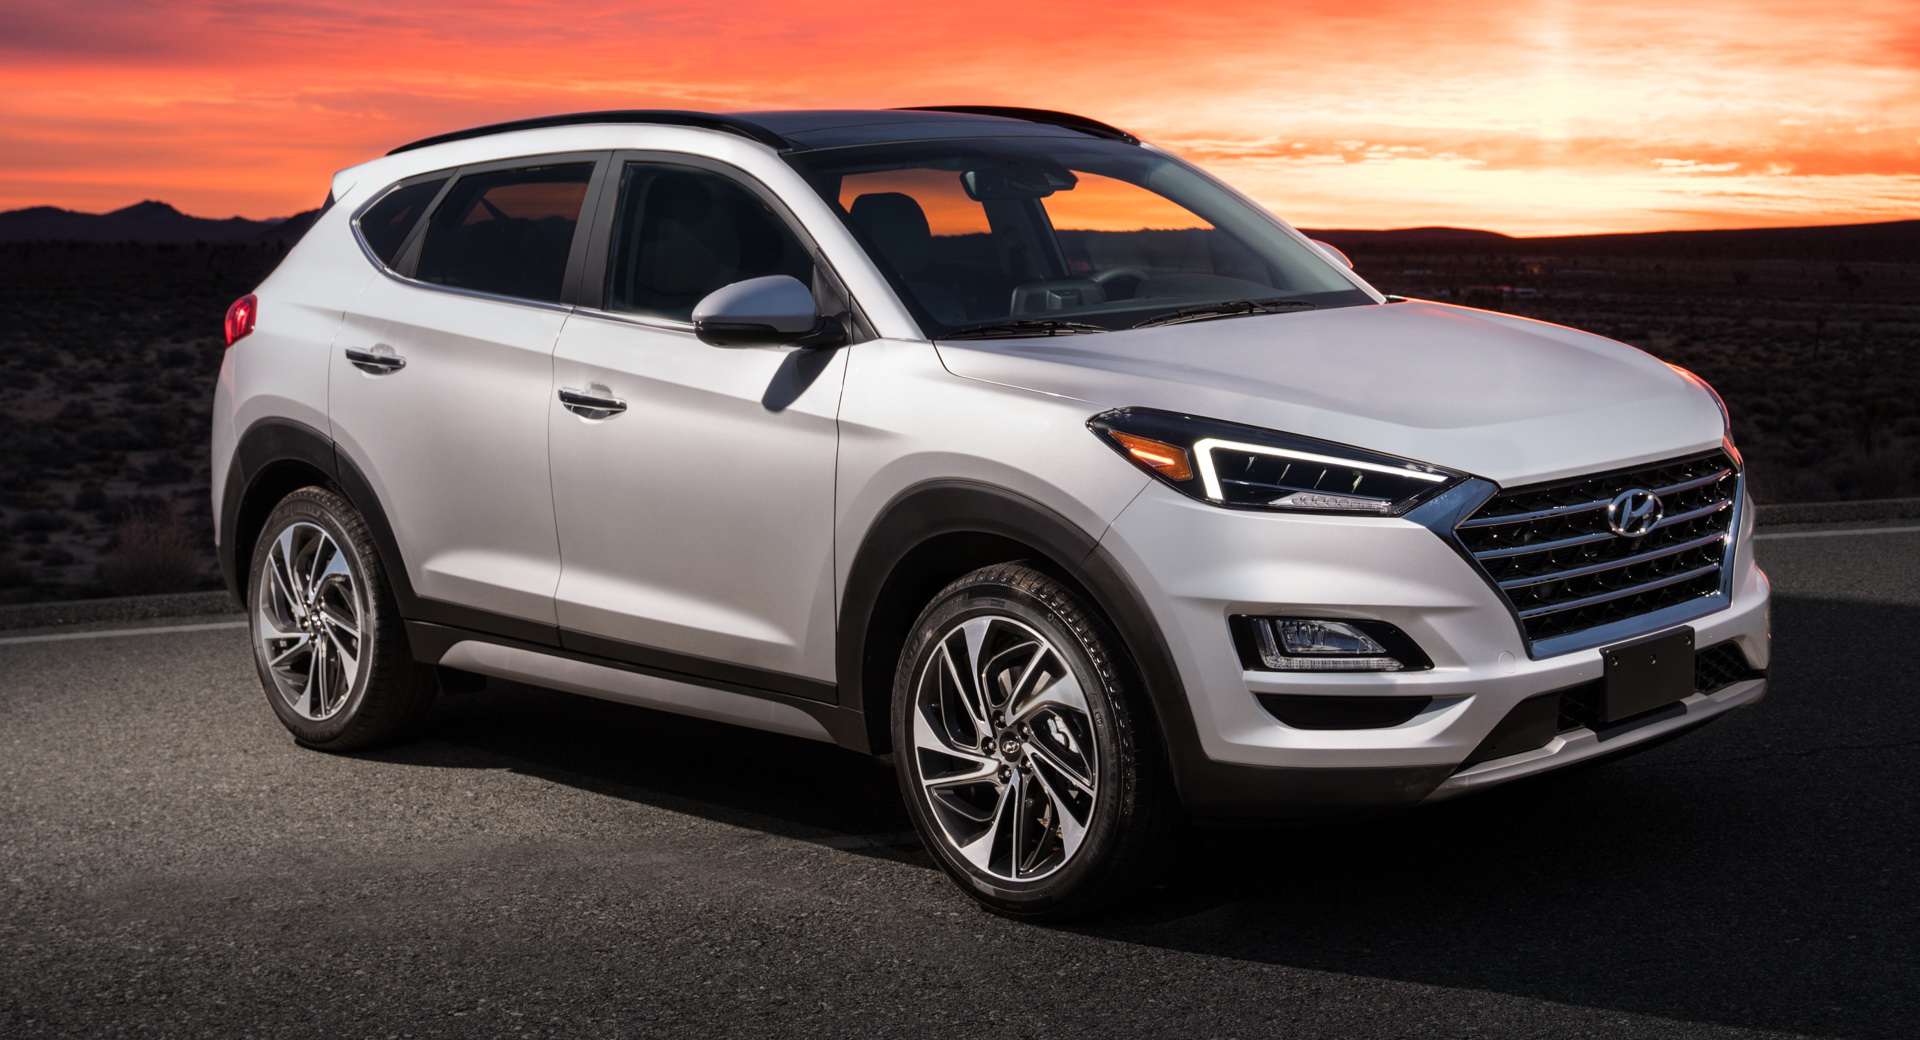 2020MY Hyundai Tucson Gets Refreshed Color Palette And Safety Gear 